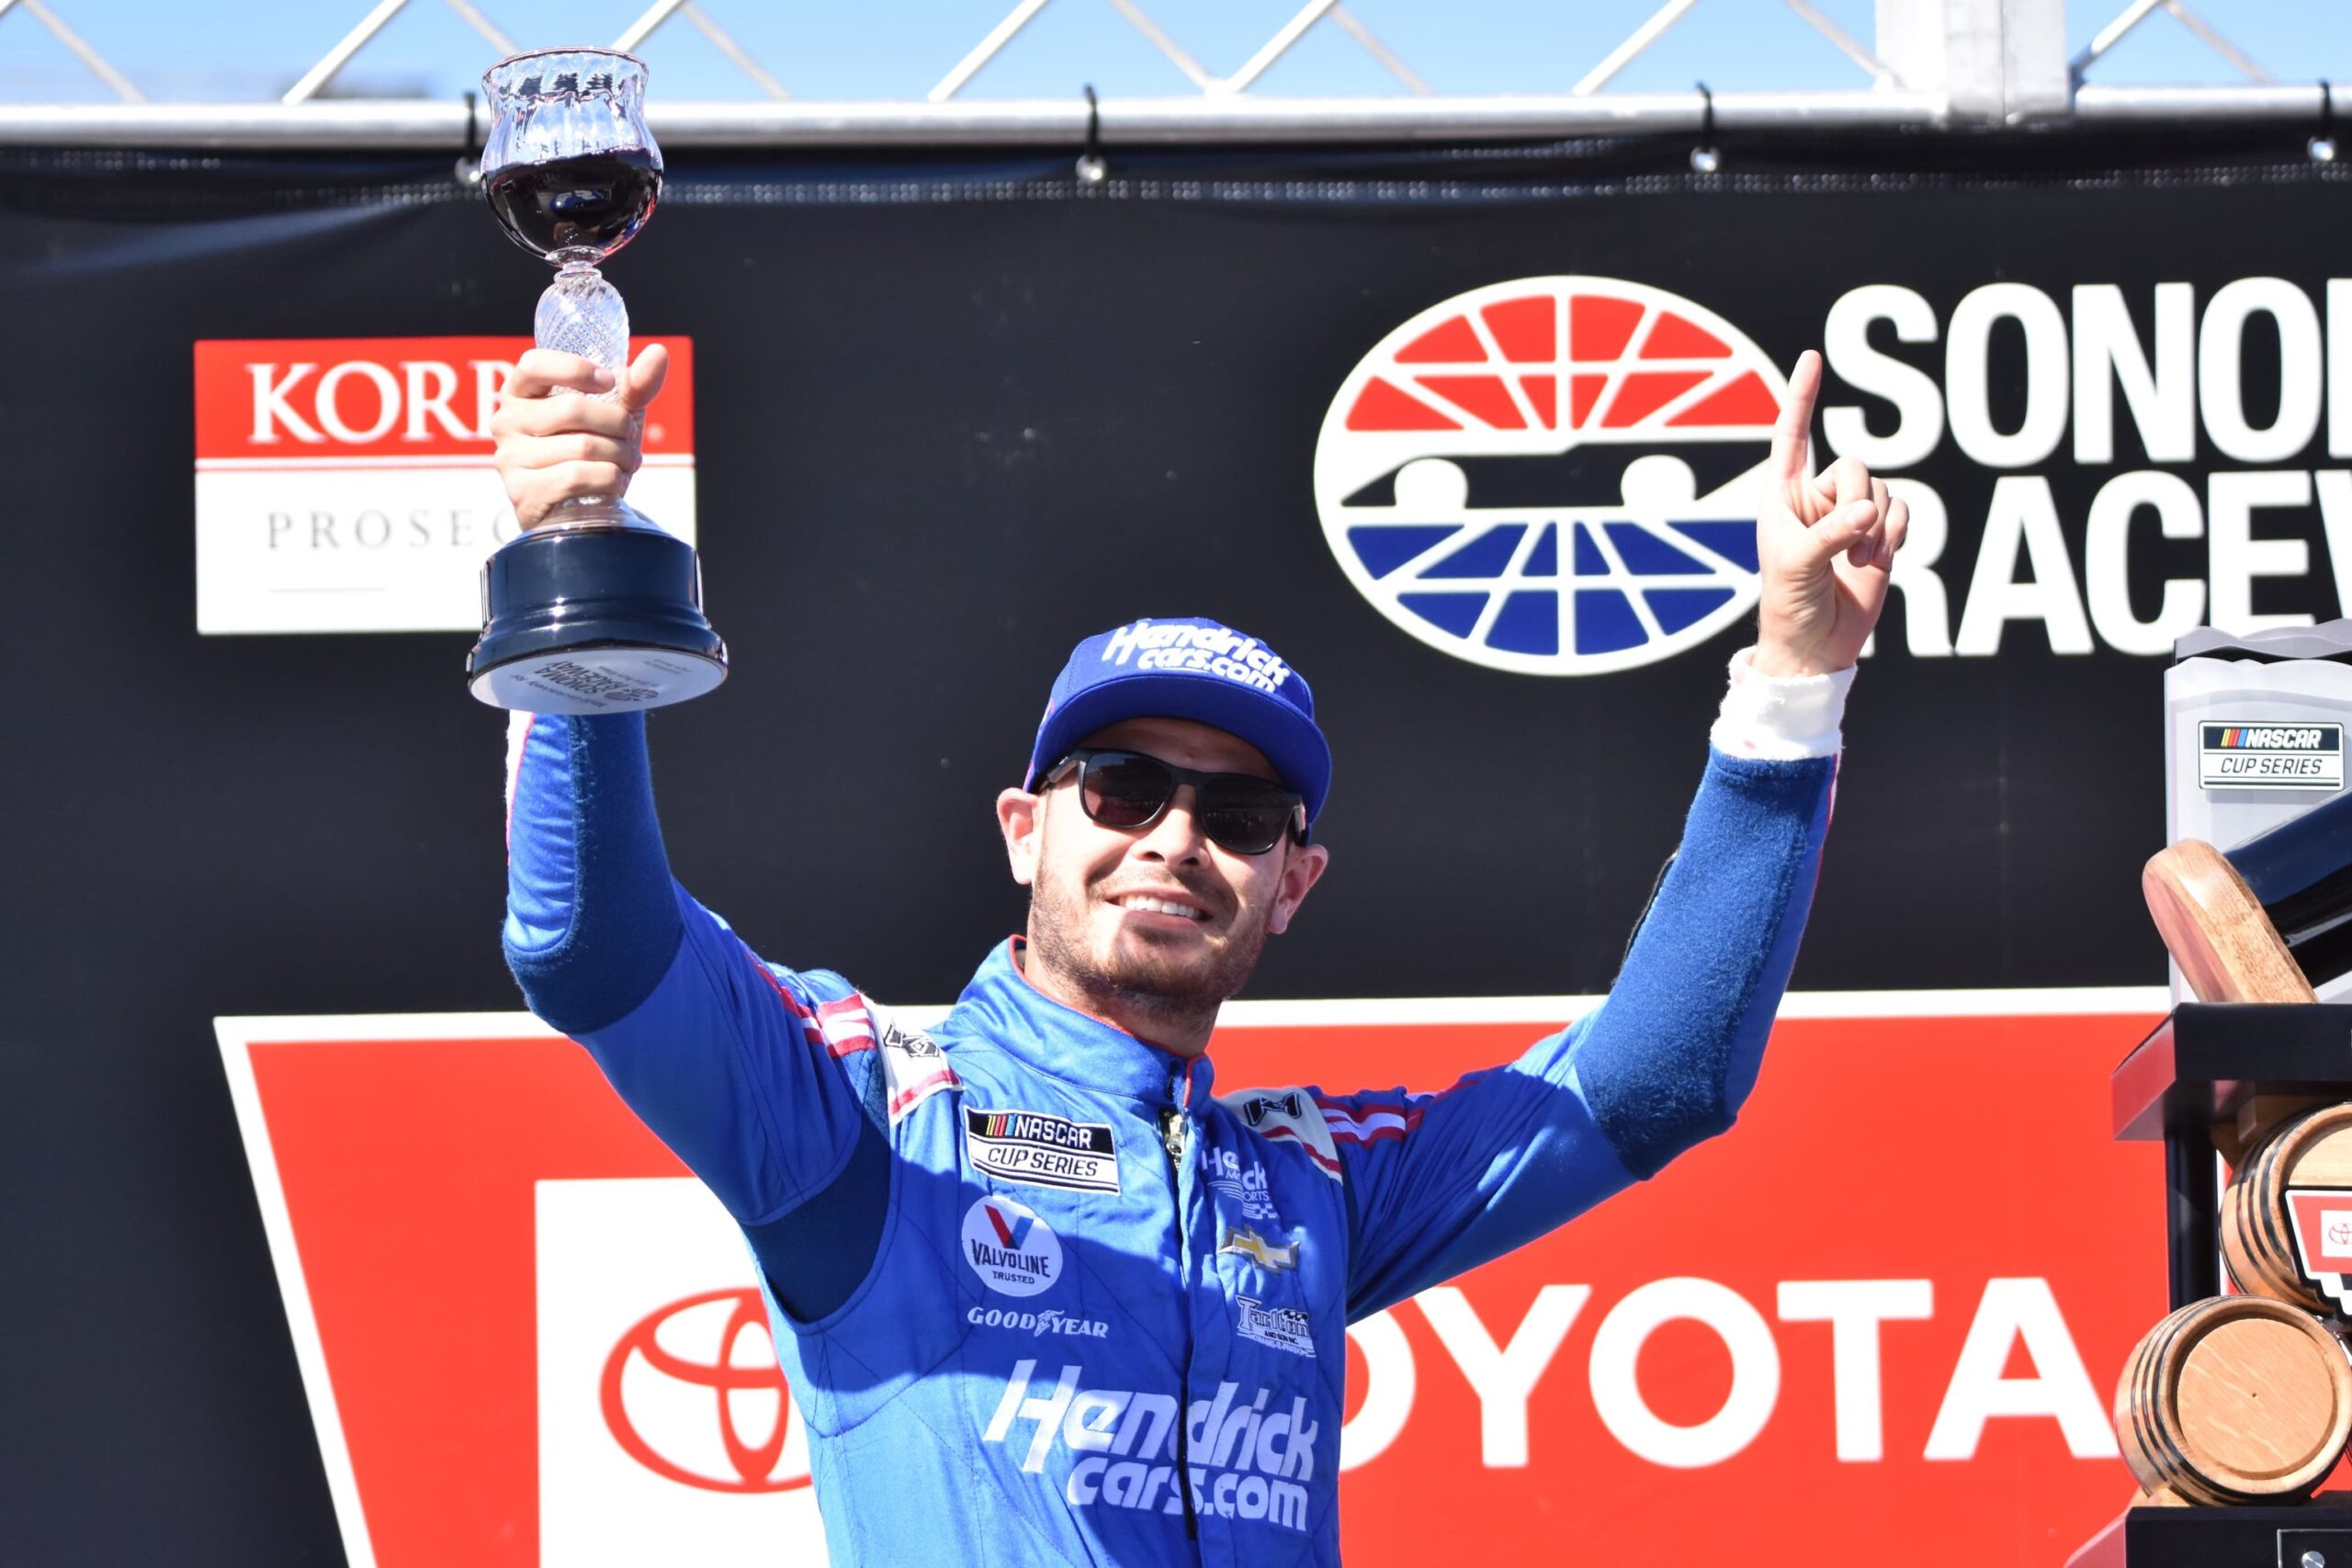 Altogether, Kyle Larson continues his hot streak with a Sonoma win. (Photo: Luis Torres/The Podium Finish)